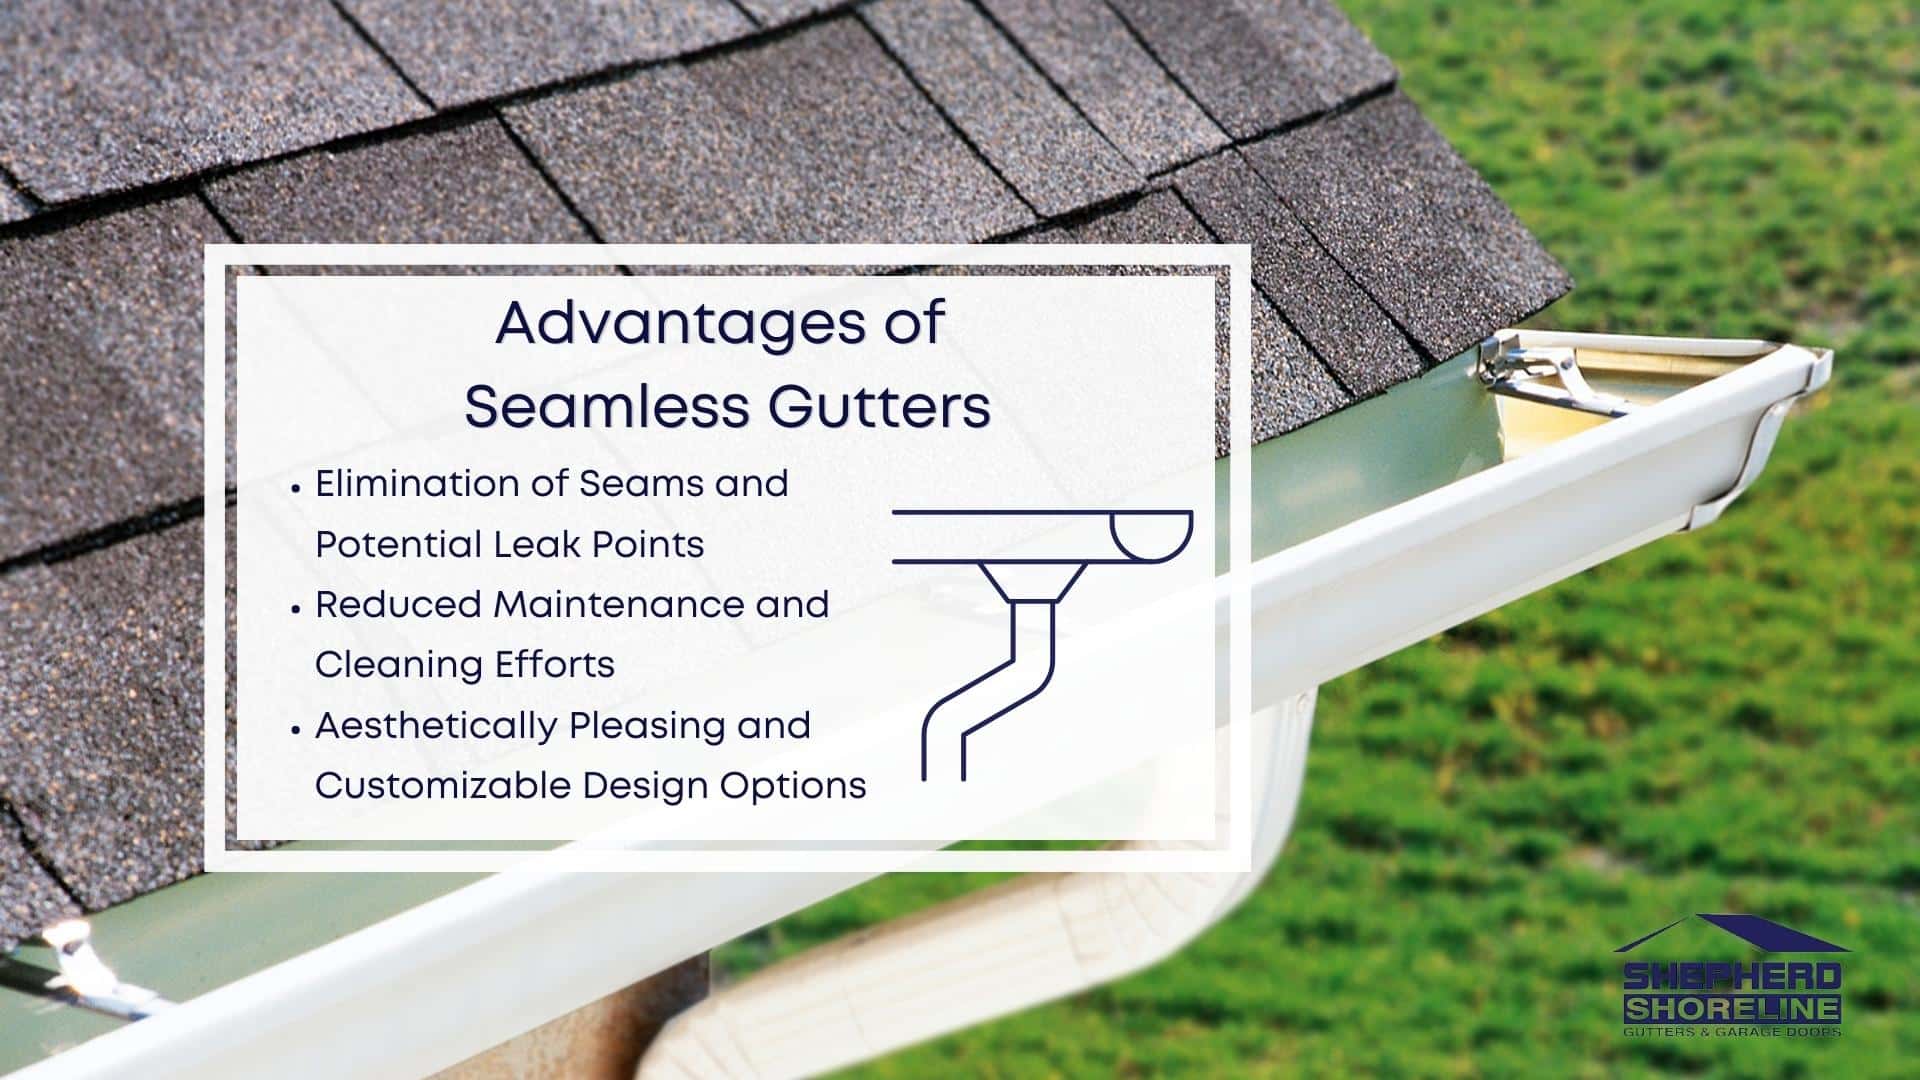 Infographic image of advantages of seamless gutters